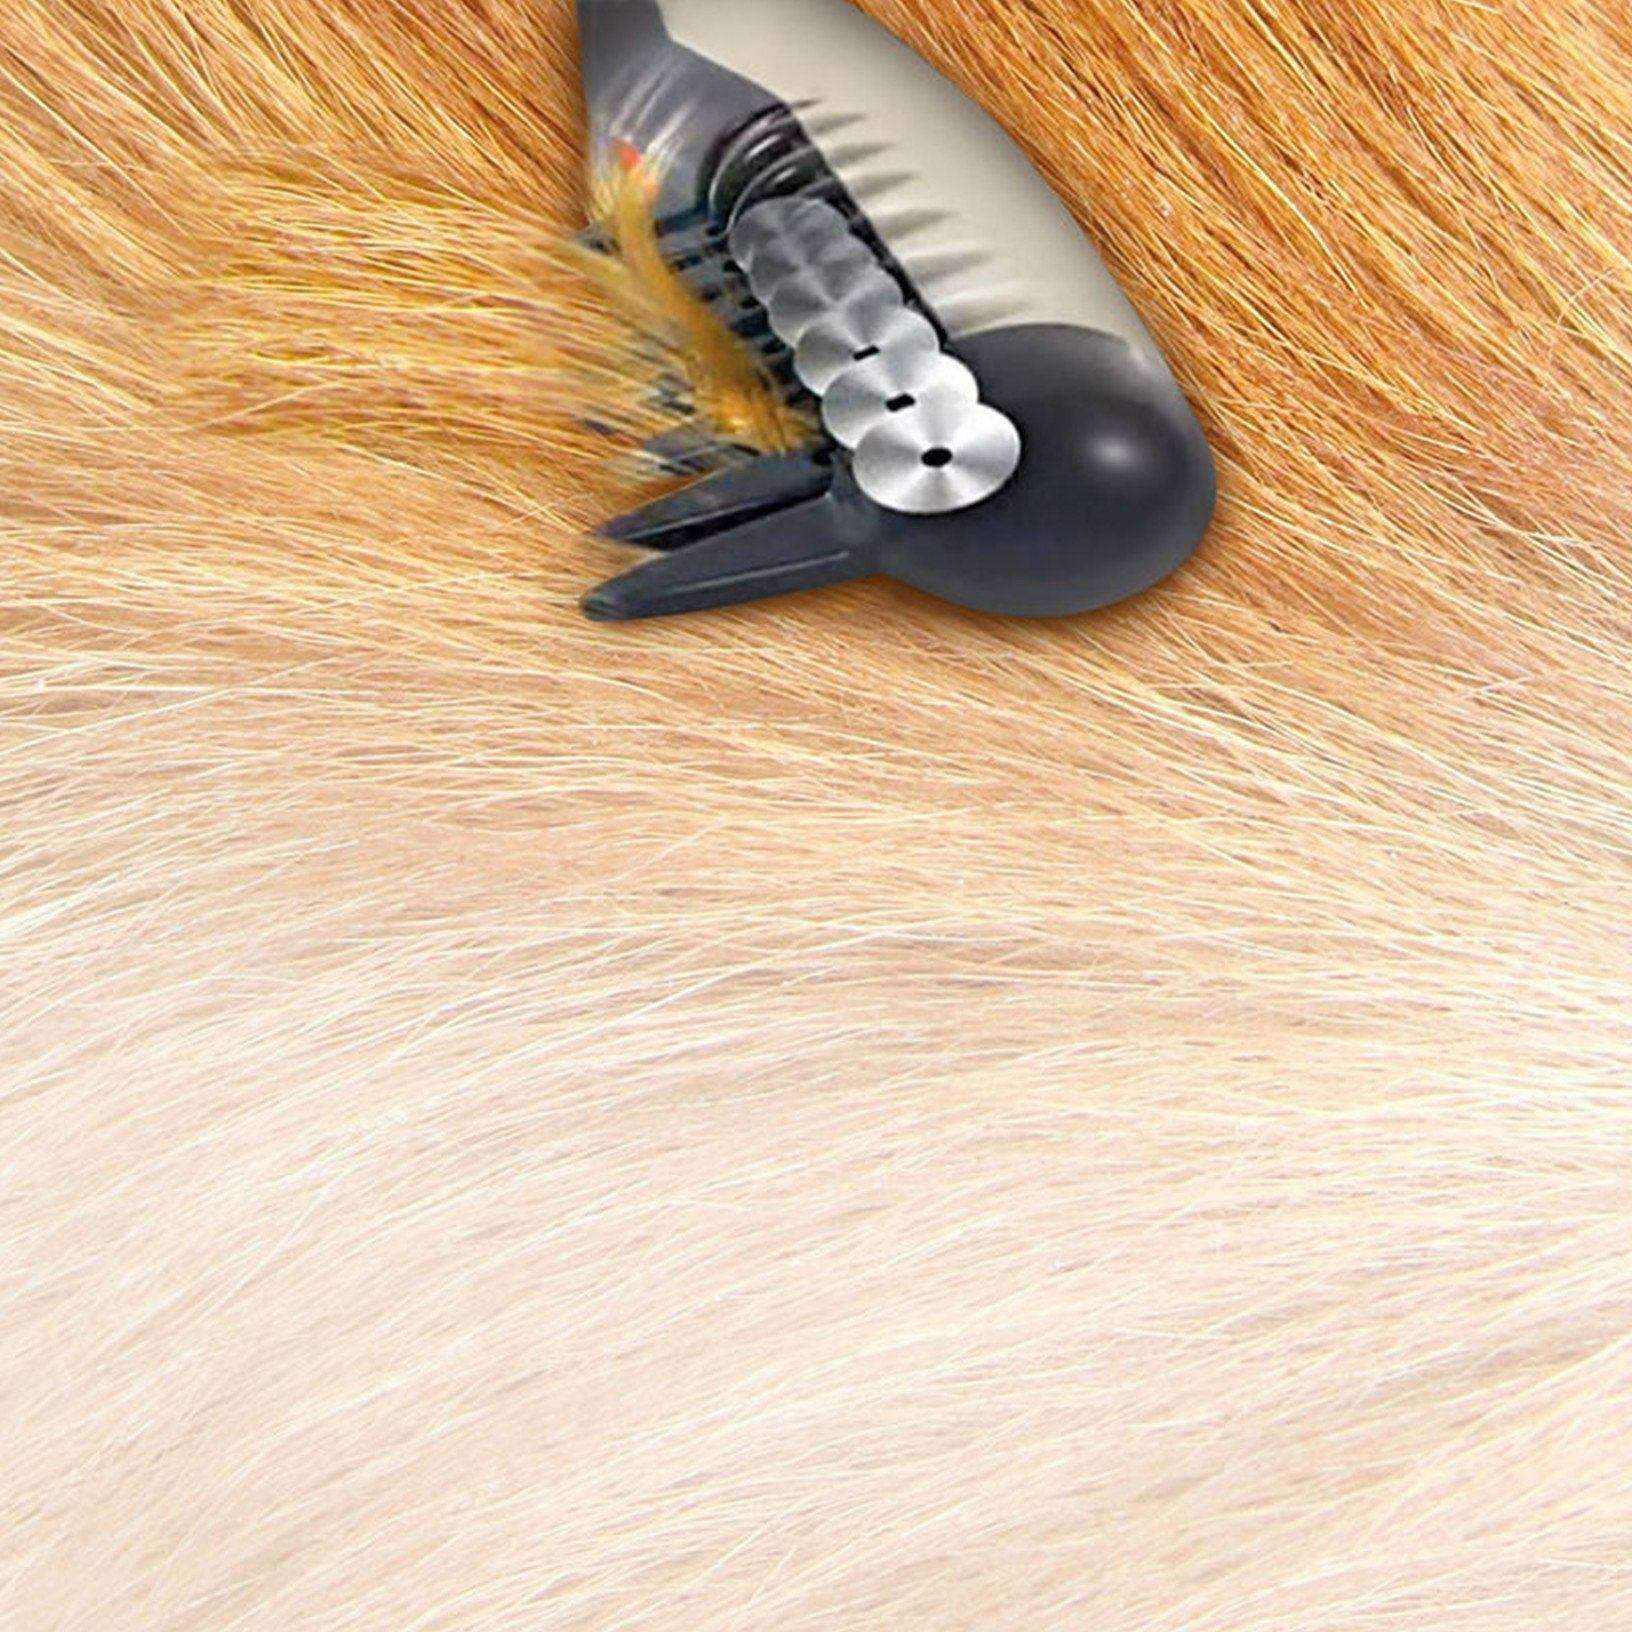 Electric Pet Grooming Comb - The Ultimate Pet Grooming Tool